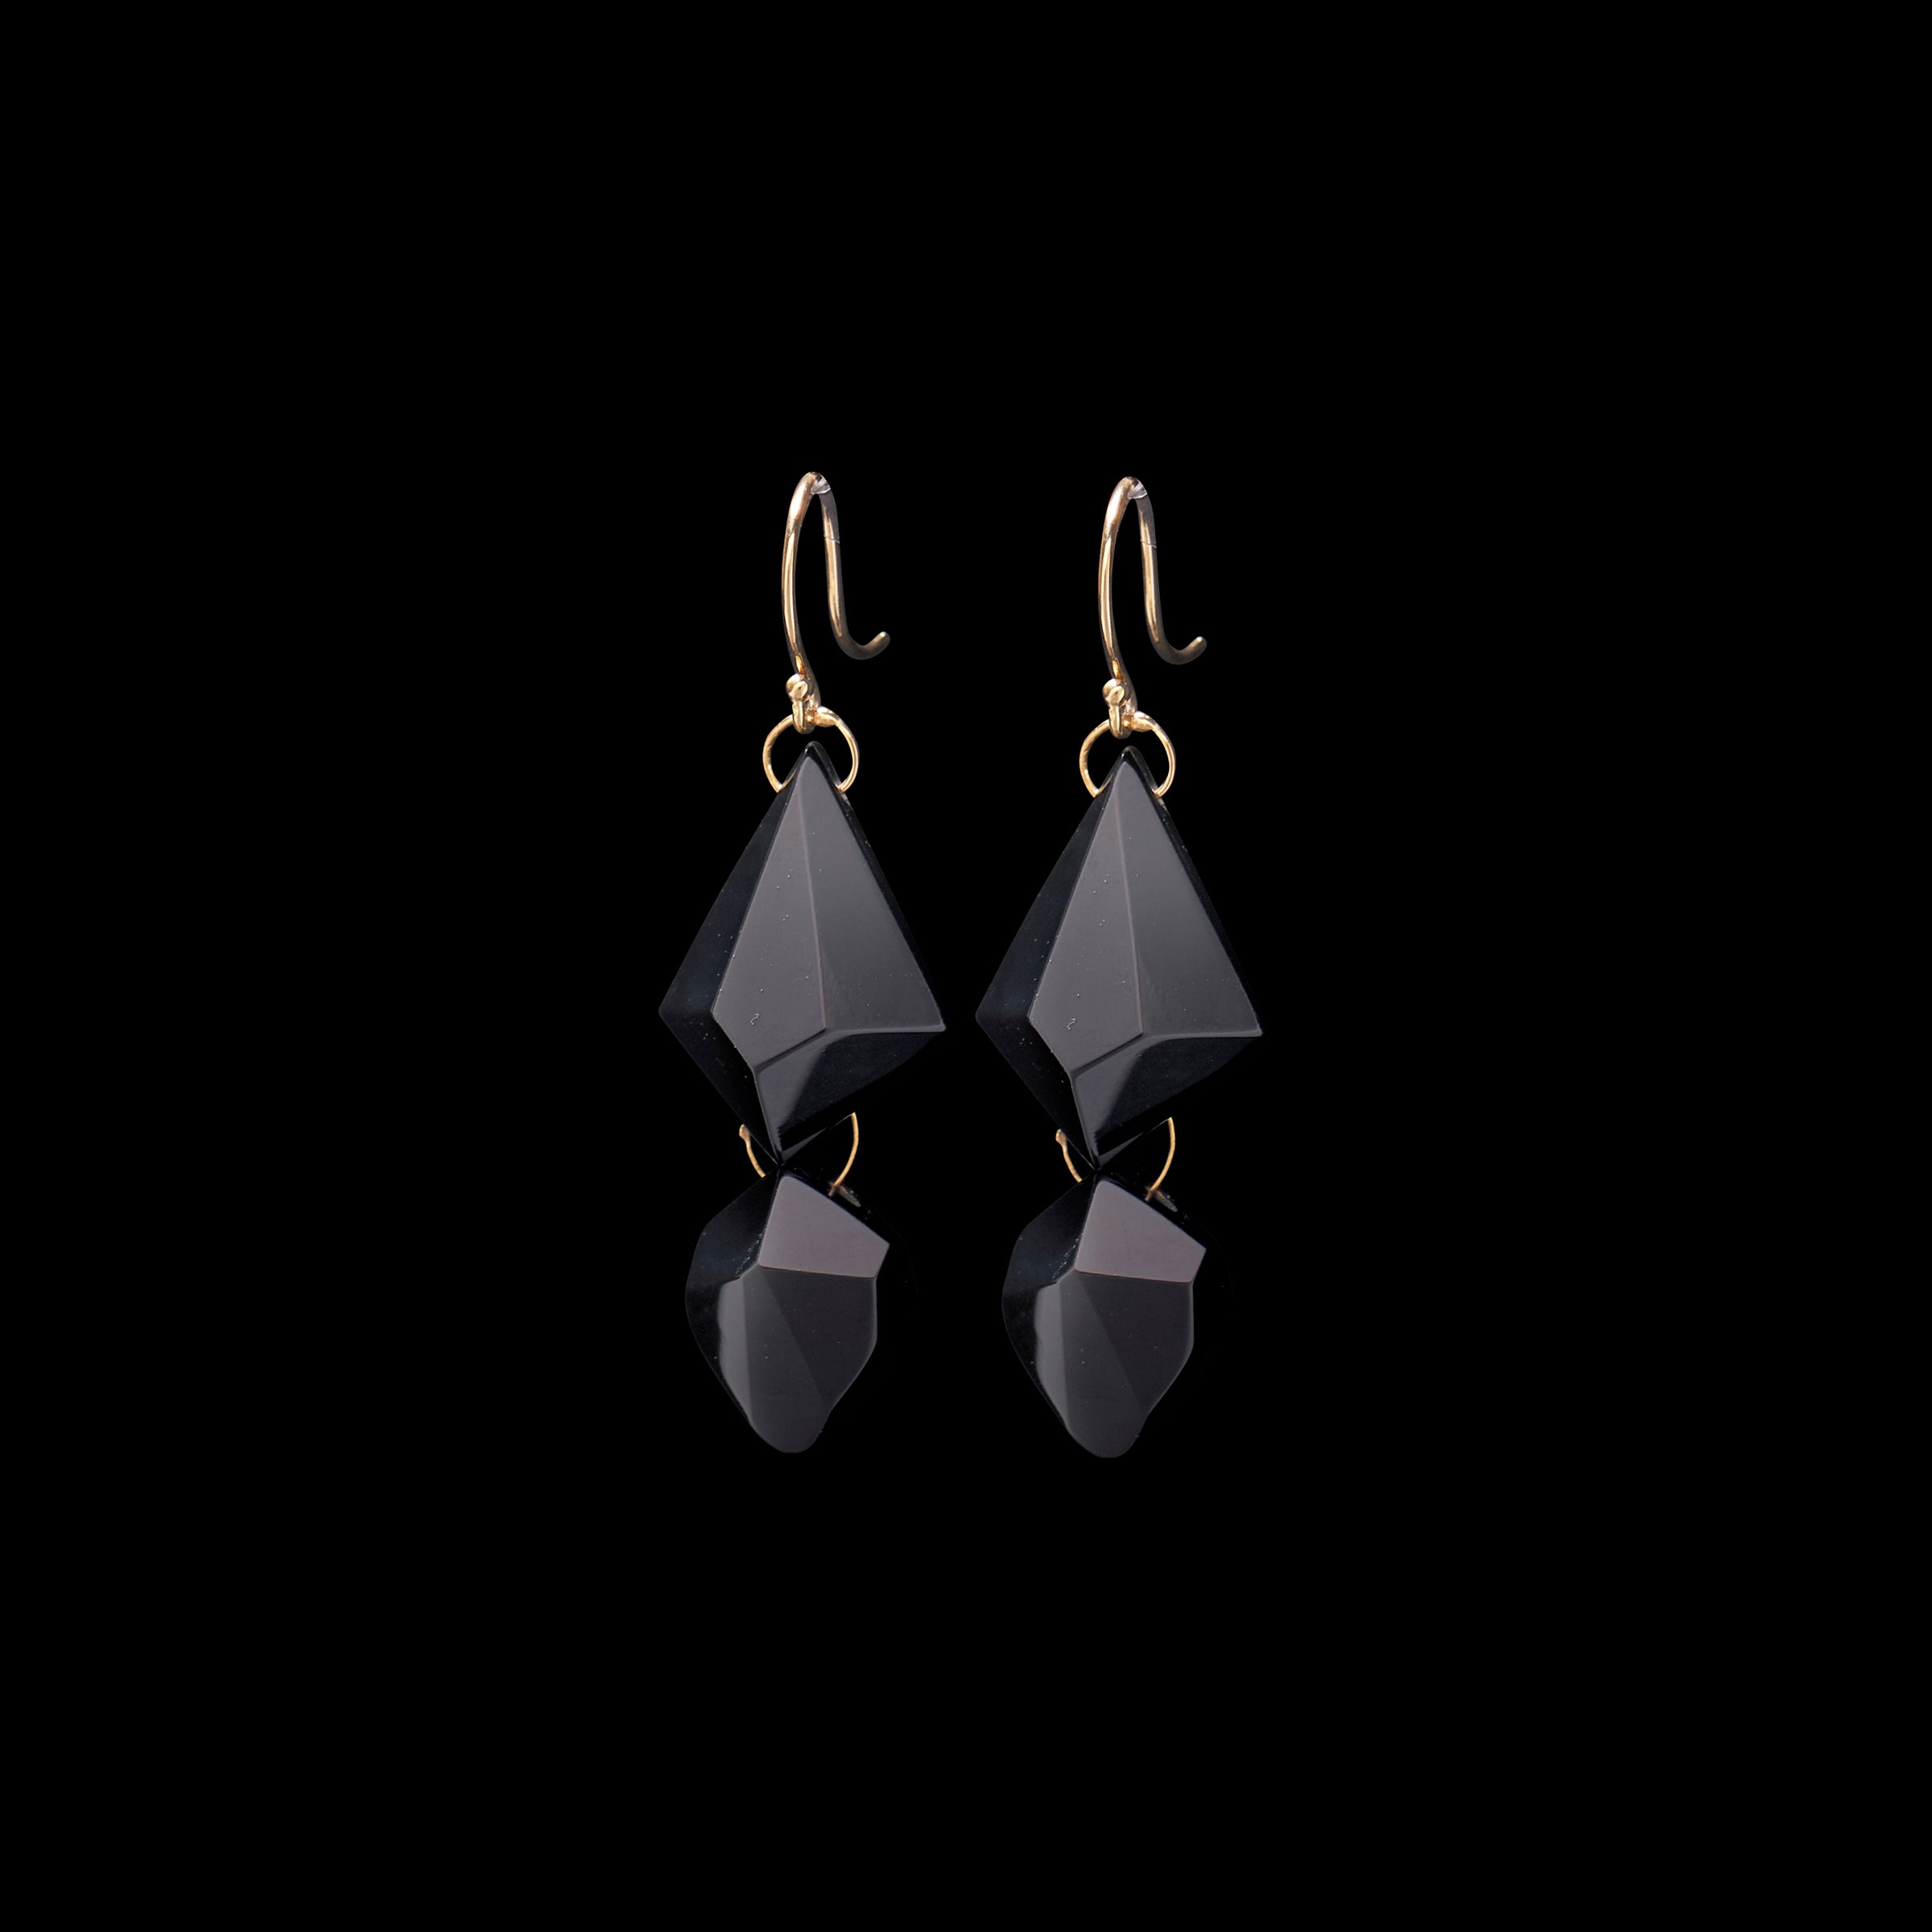 Double Faceted Drop Earring